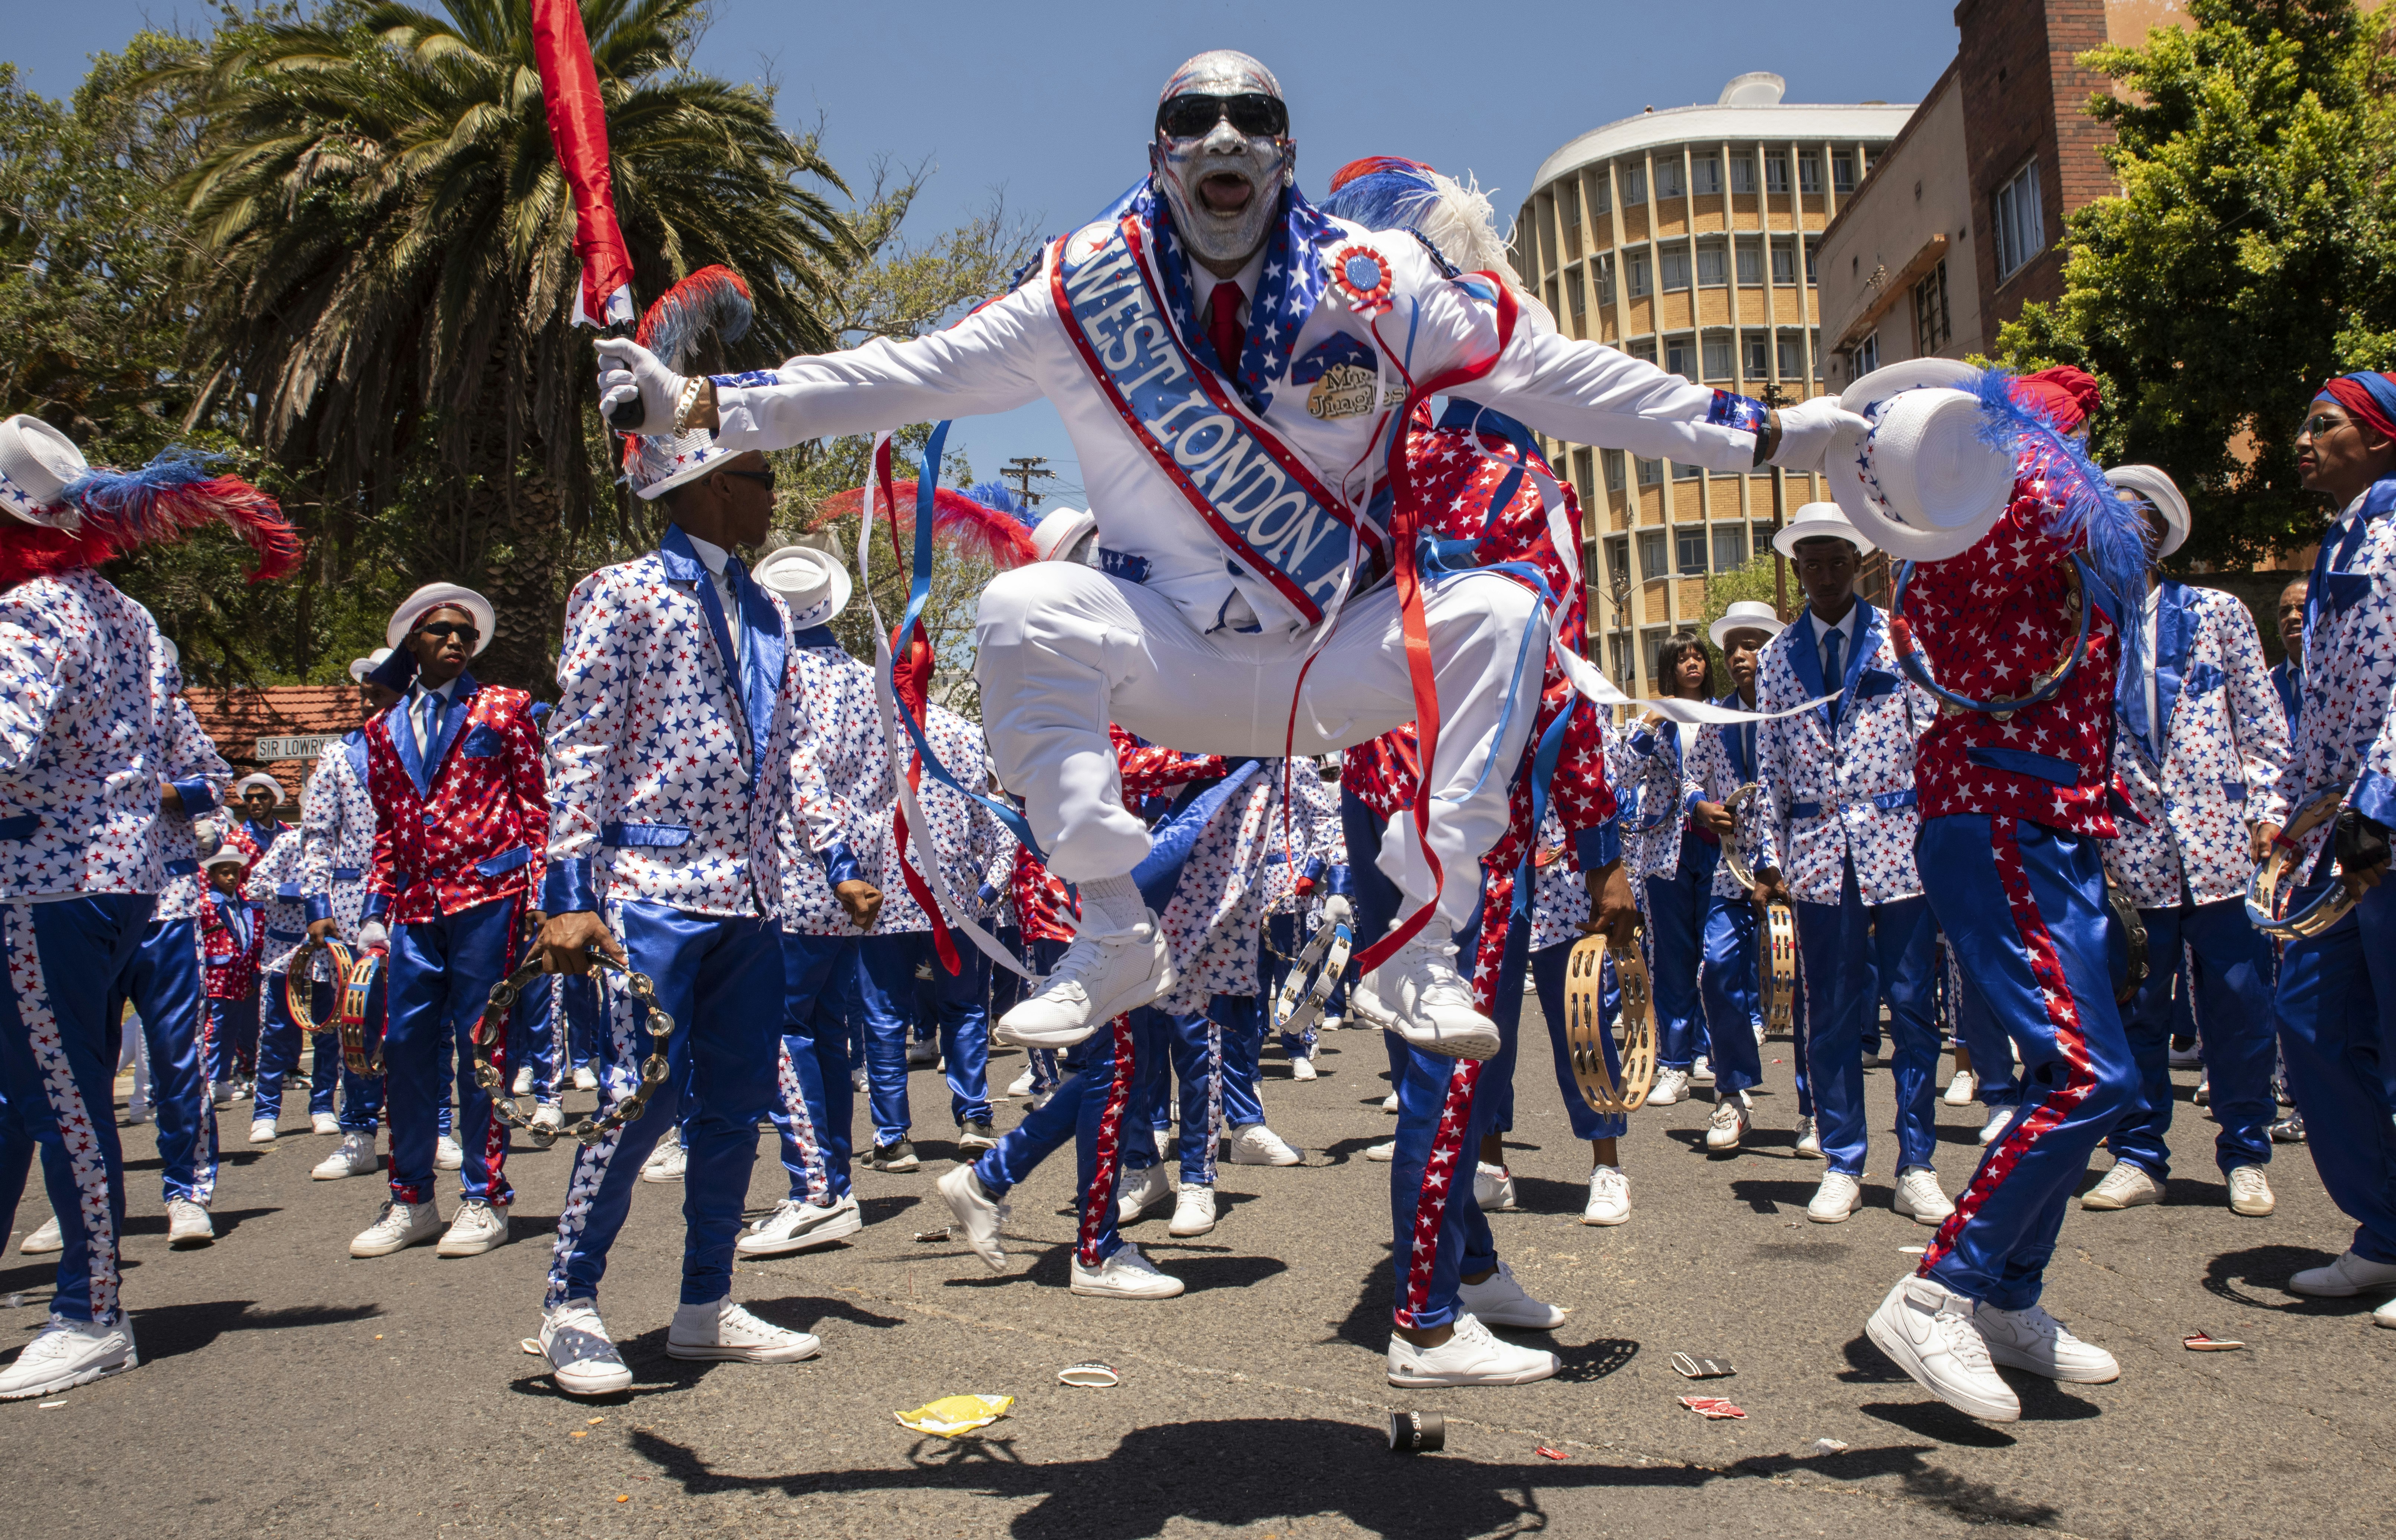 A man dressed in a white suit with a red, white and blue sash with the words "West London" on it jumps high in the air holding a white hat and red umbrella during the Cape Town Street Parade